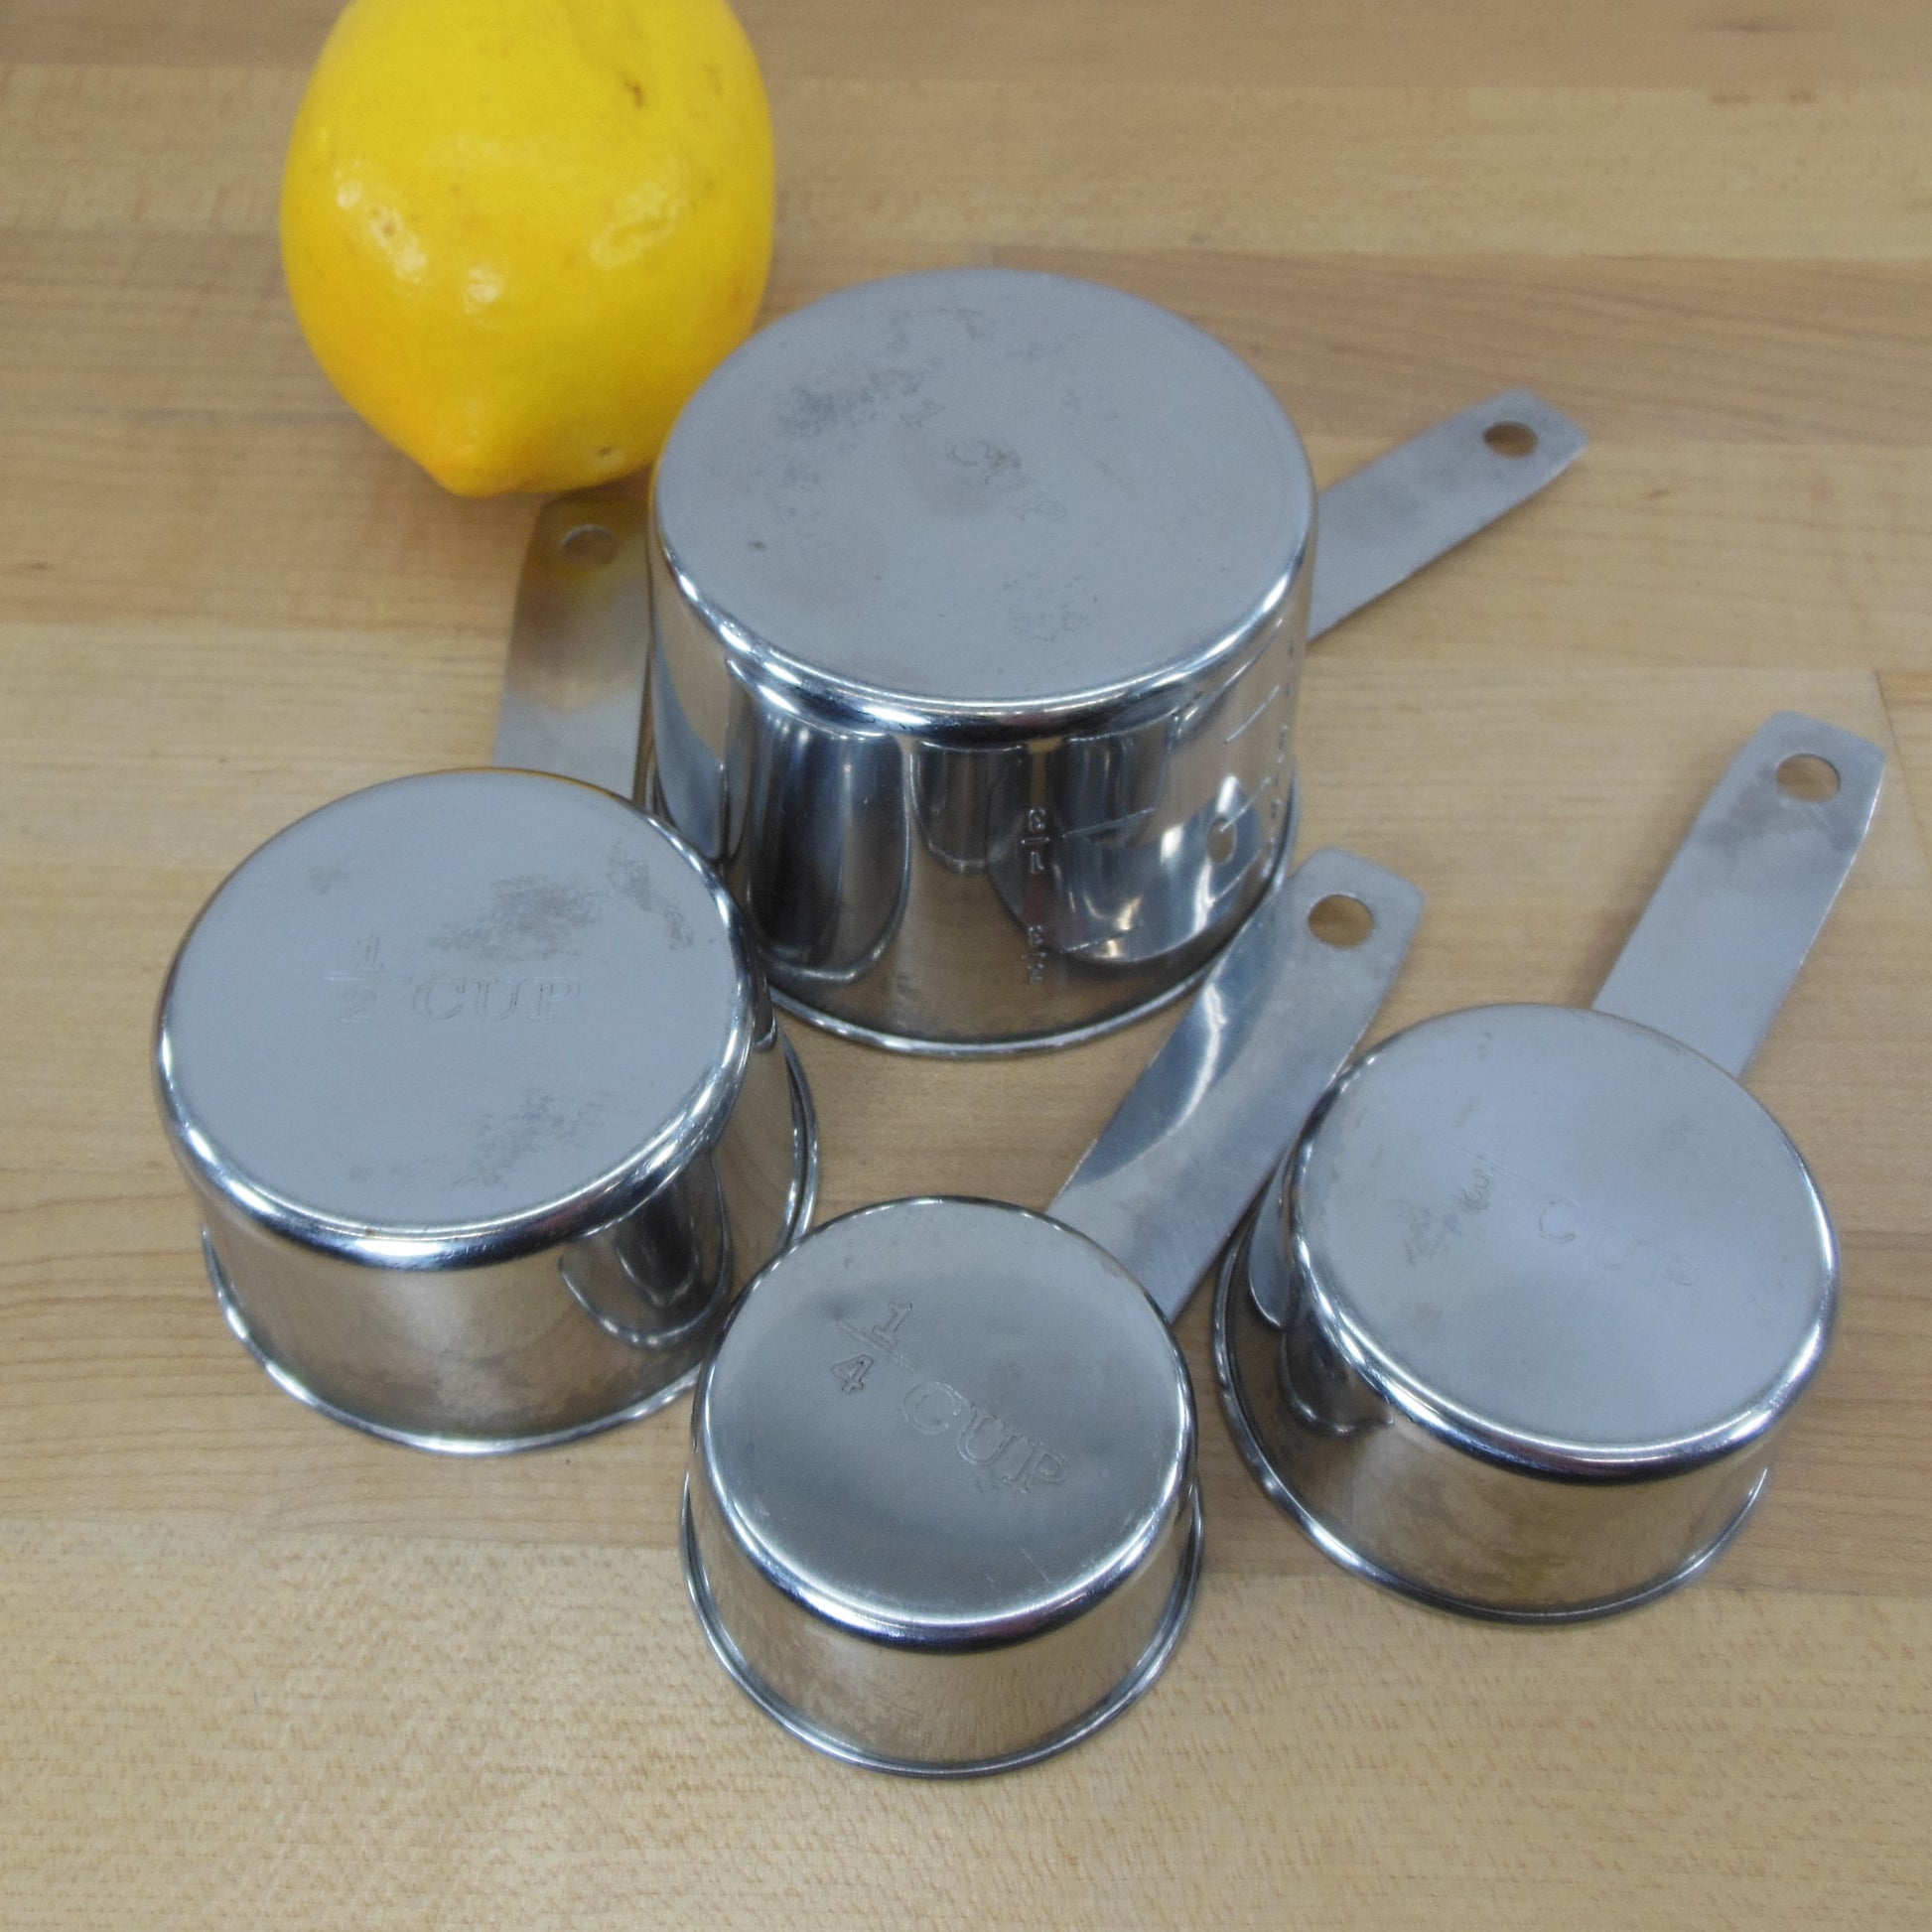 Unbranded Foley Style 4 Set Stainless Steel Measuring Cups - 1/4, 1/3, 1/2, 1 Cup